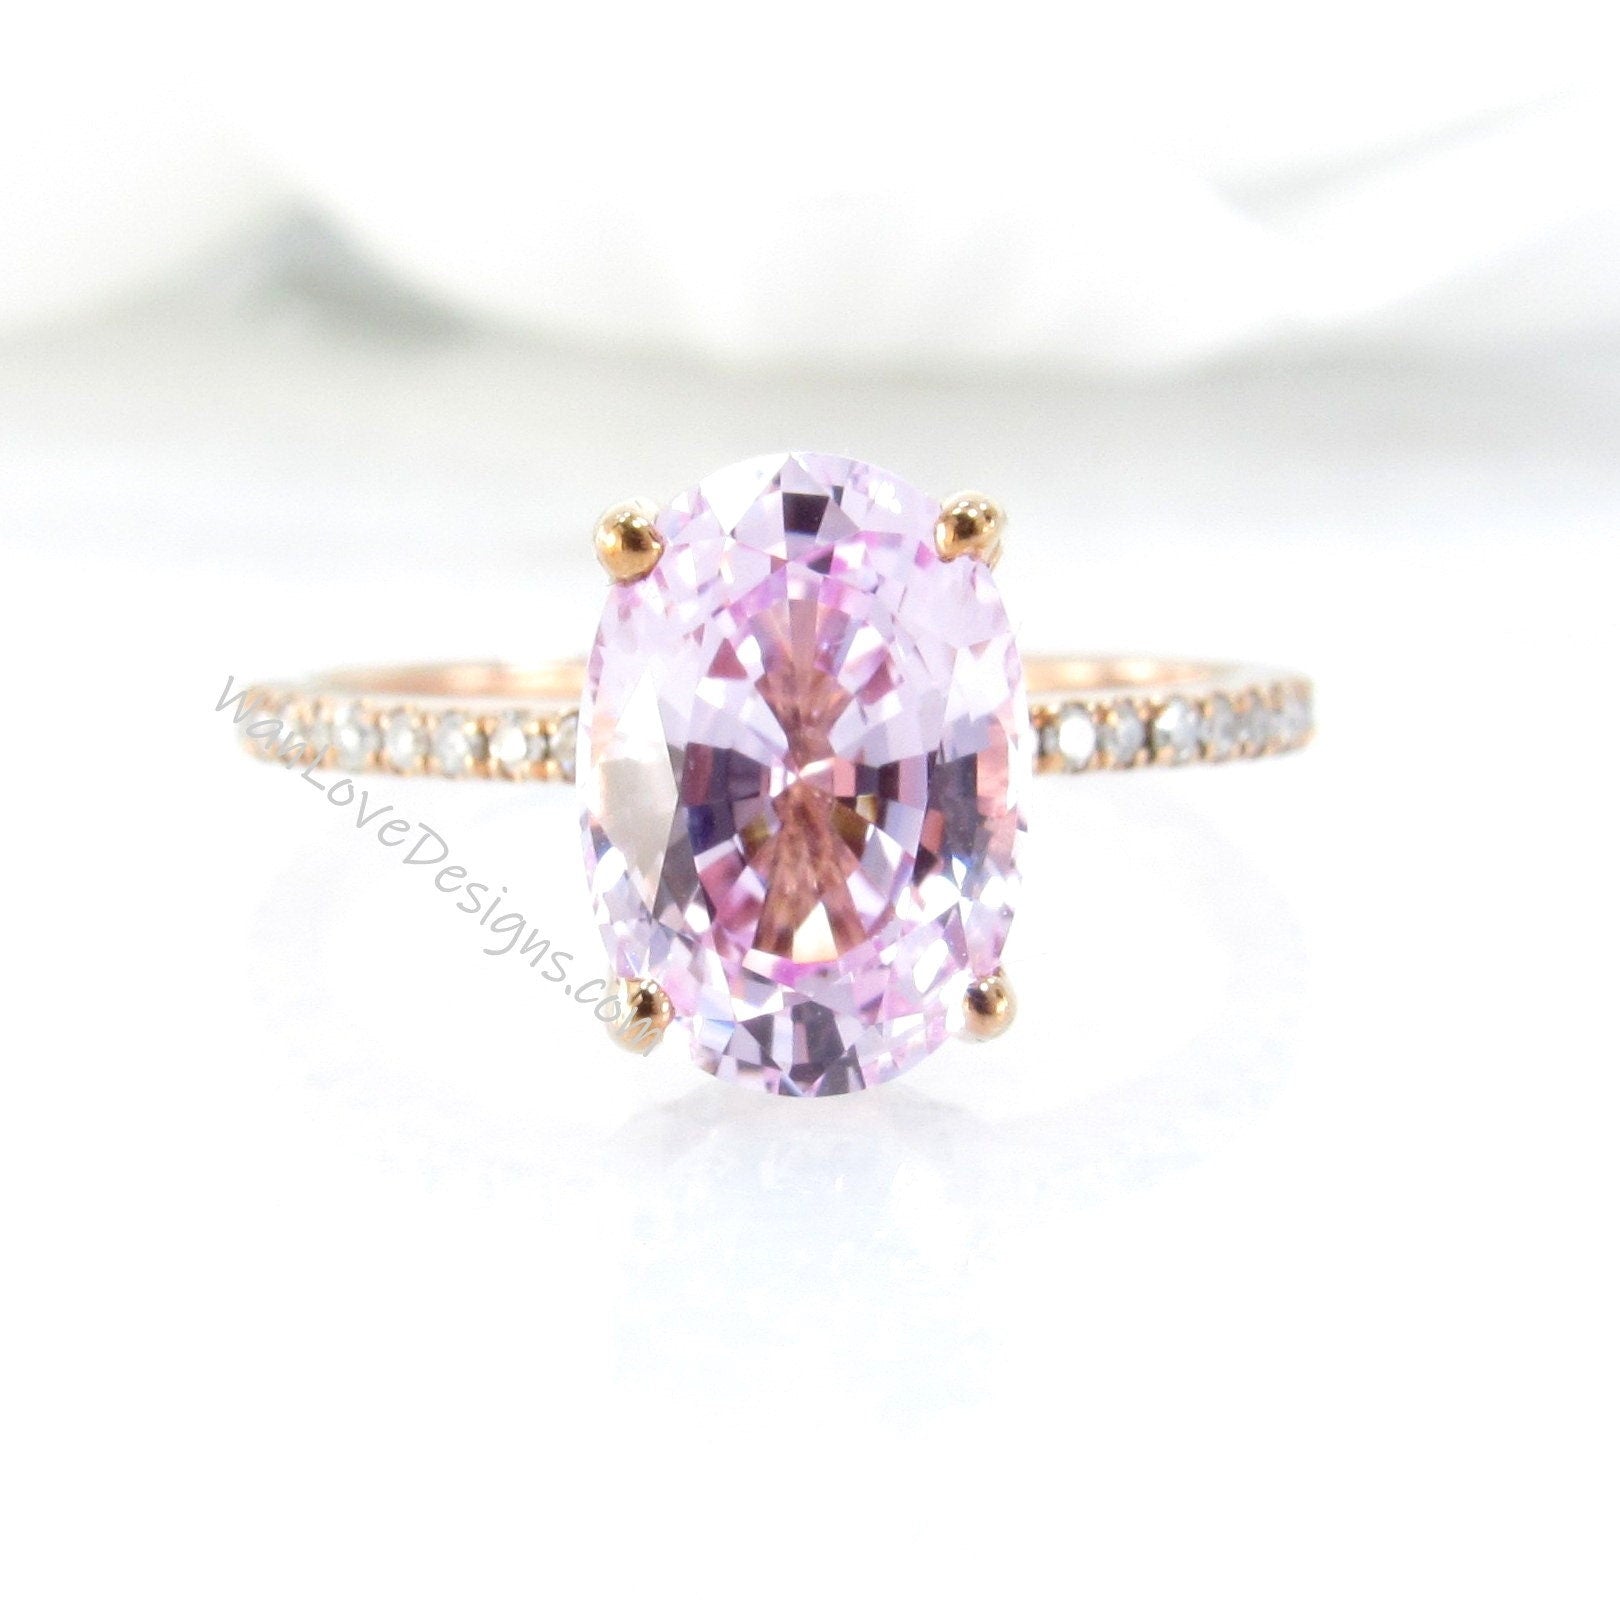 Ready to ship Side Halo Oval Peach Sapphire engagement ring rose gold diamond half halo bridal Antique wedding ring Wan Love Designs